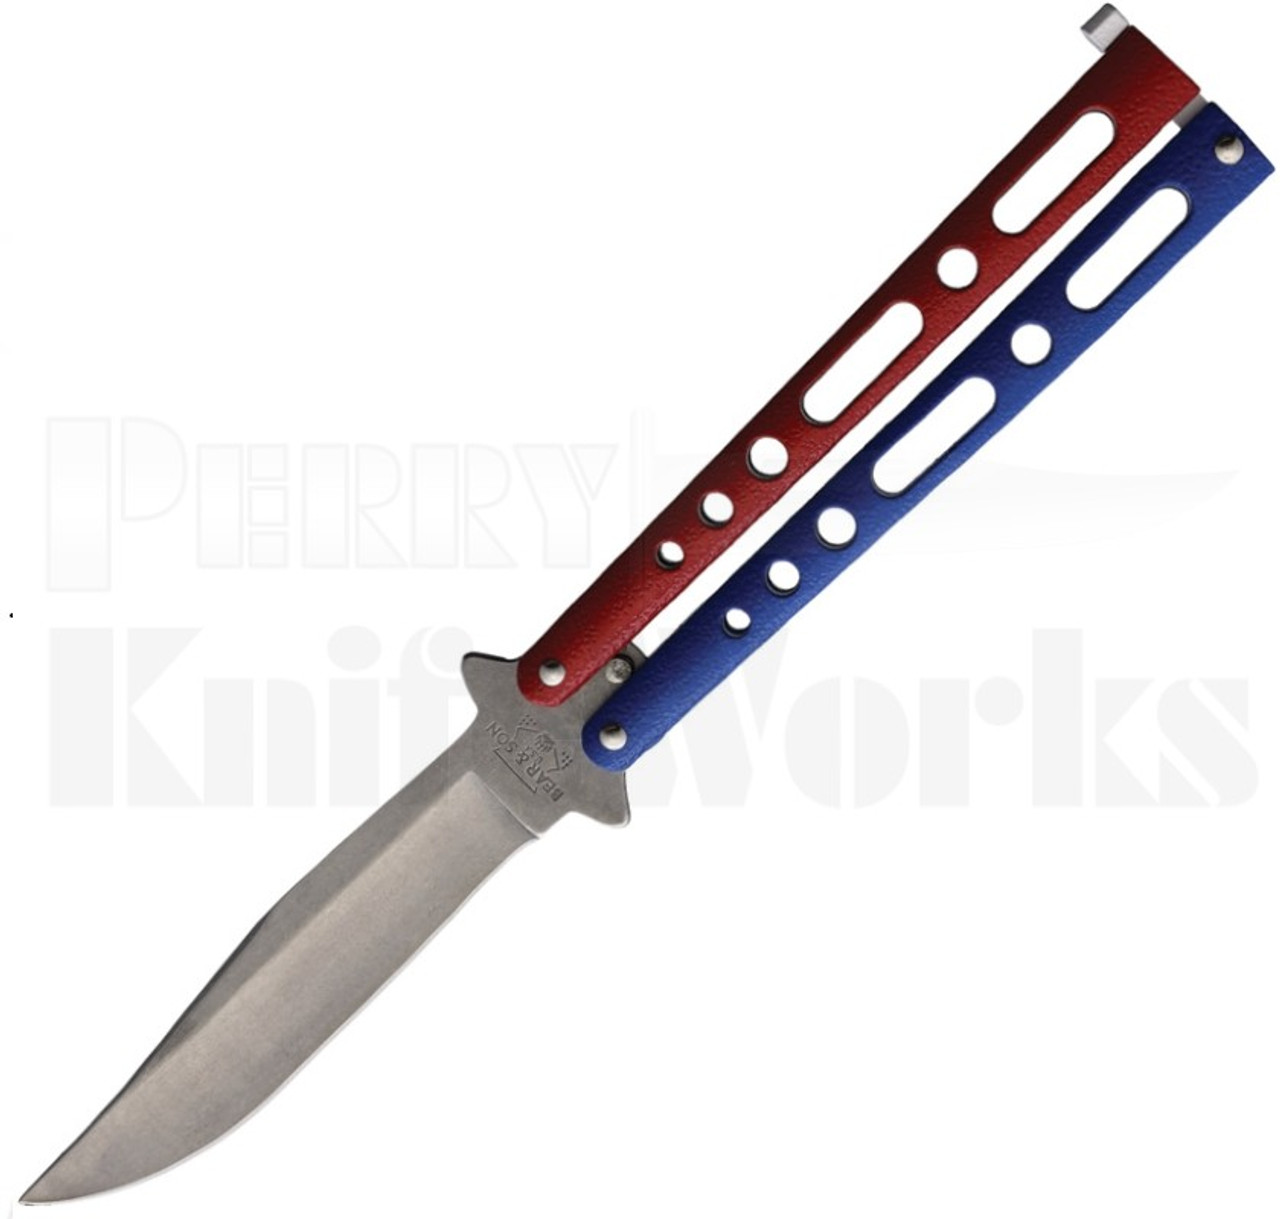 Bear & Son Butterfly Knife Red White Blue l Stonewash Blade l For Sale